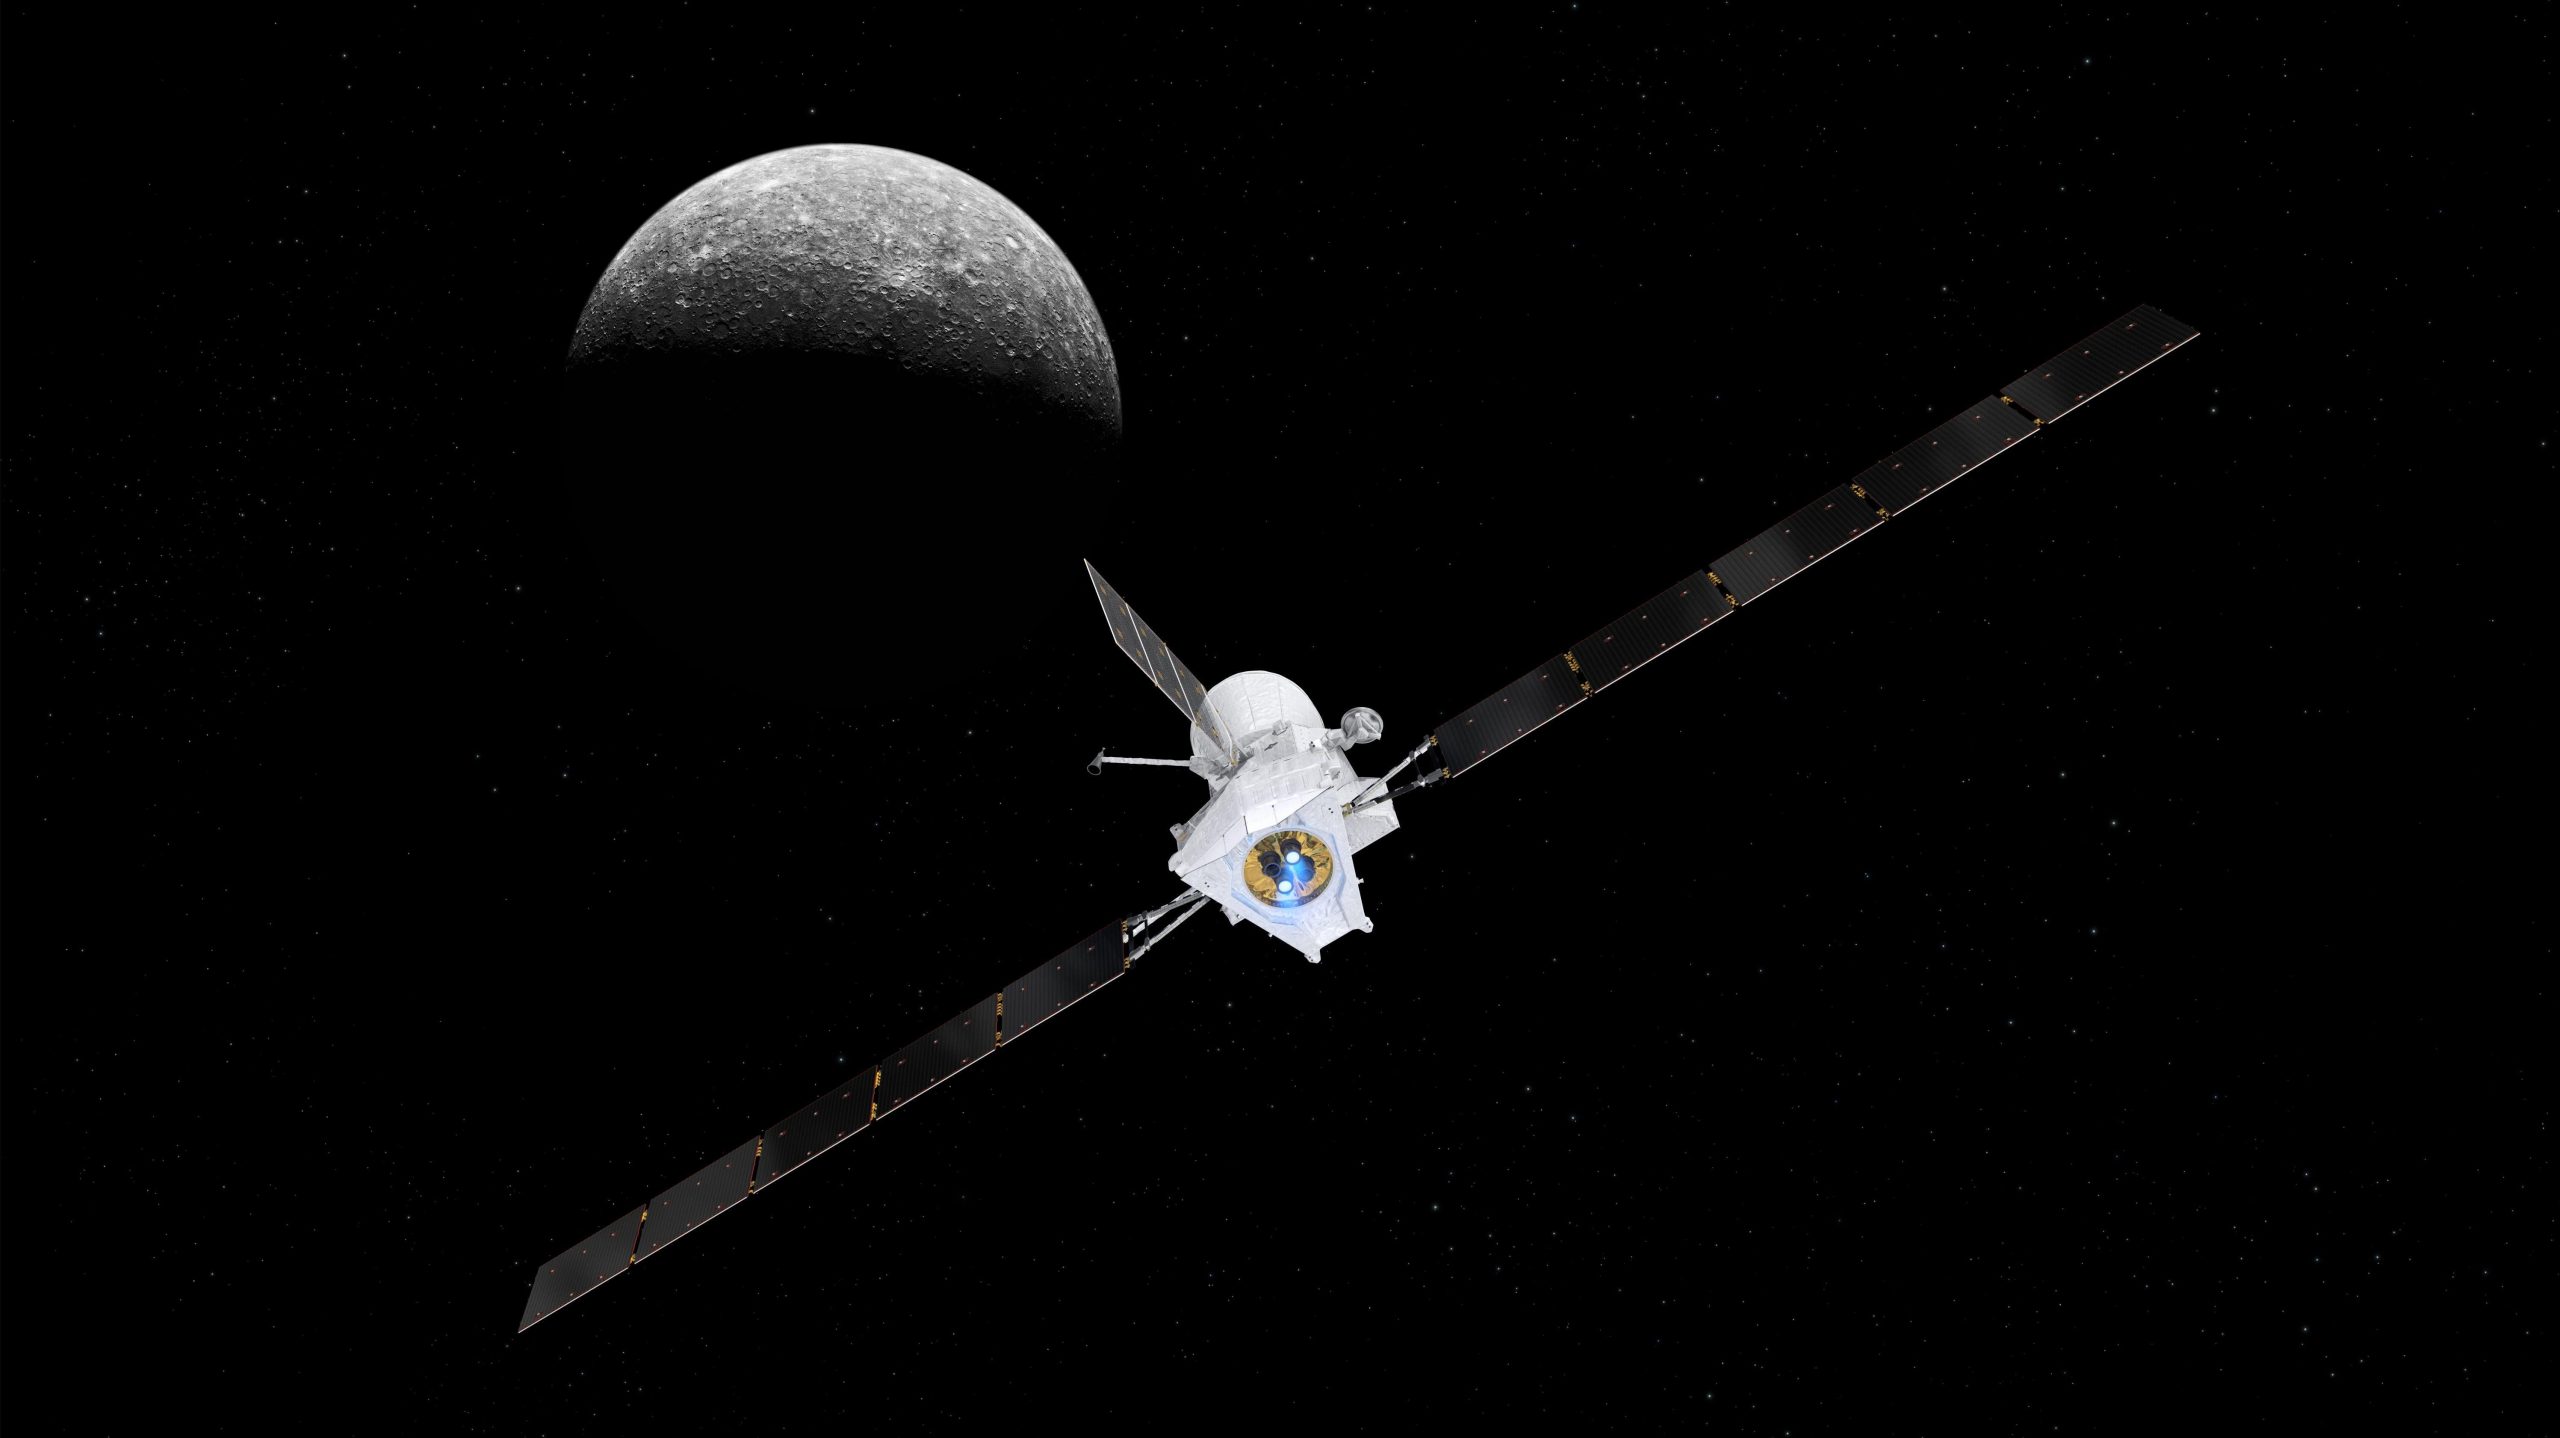 Twin Probes Suffer Thruster Glitch on the Way to Mercury [Video]